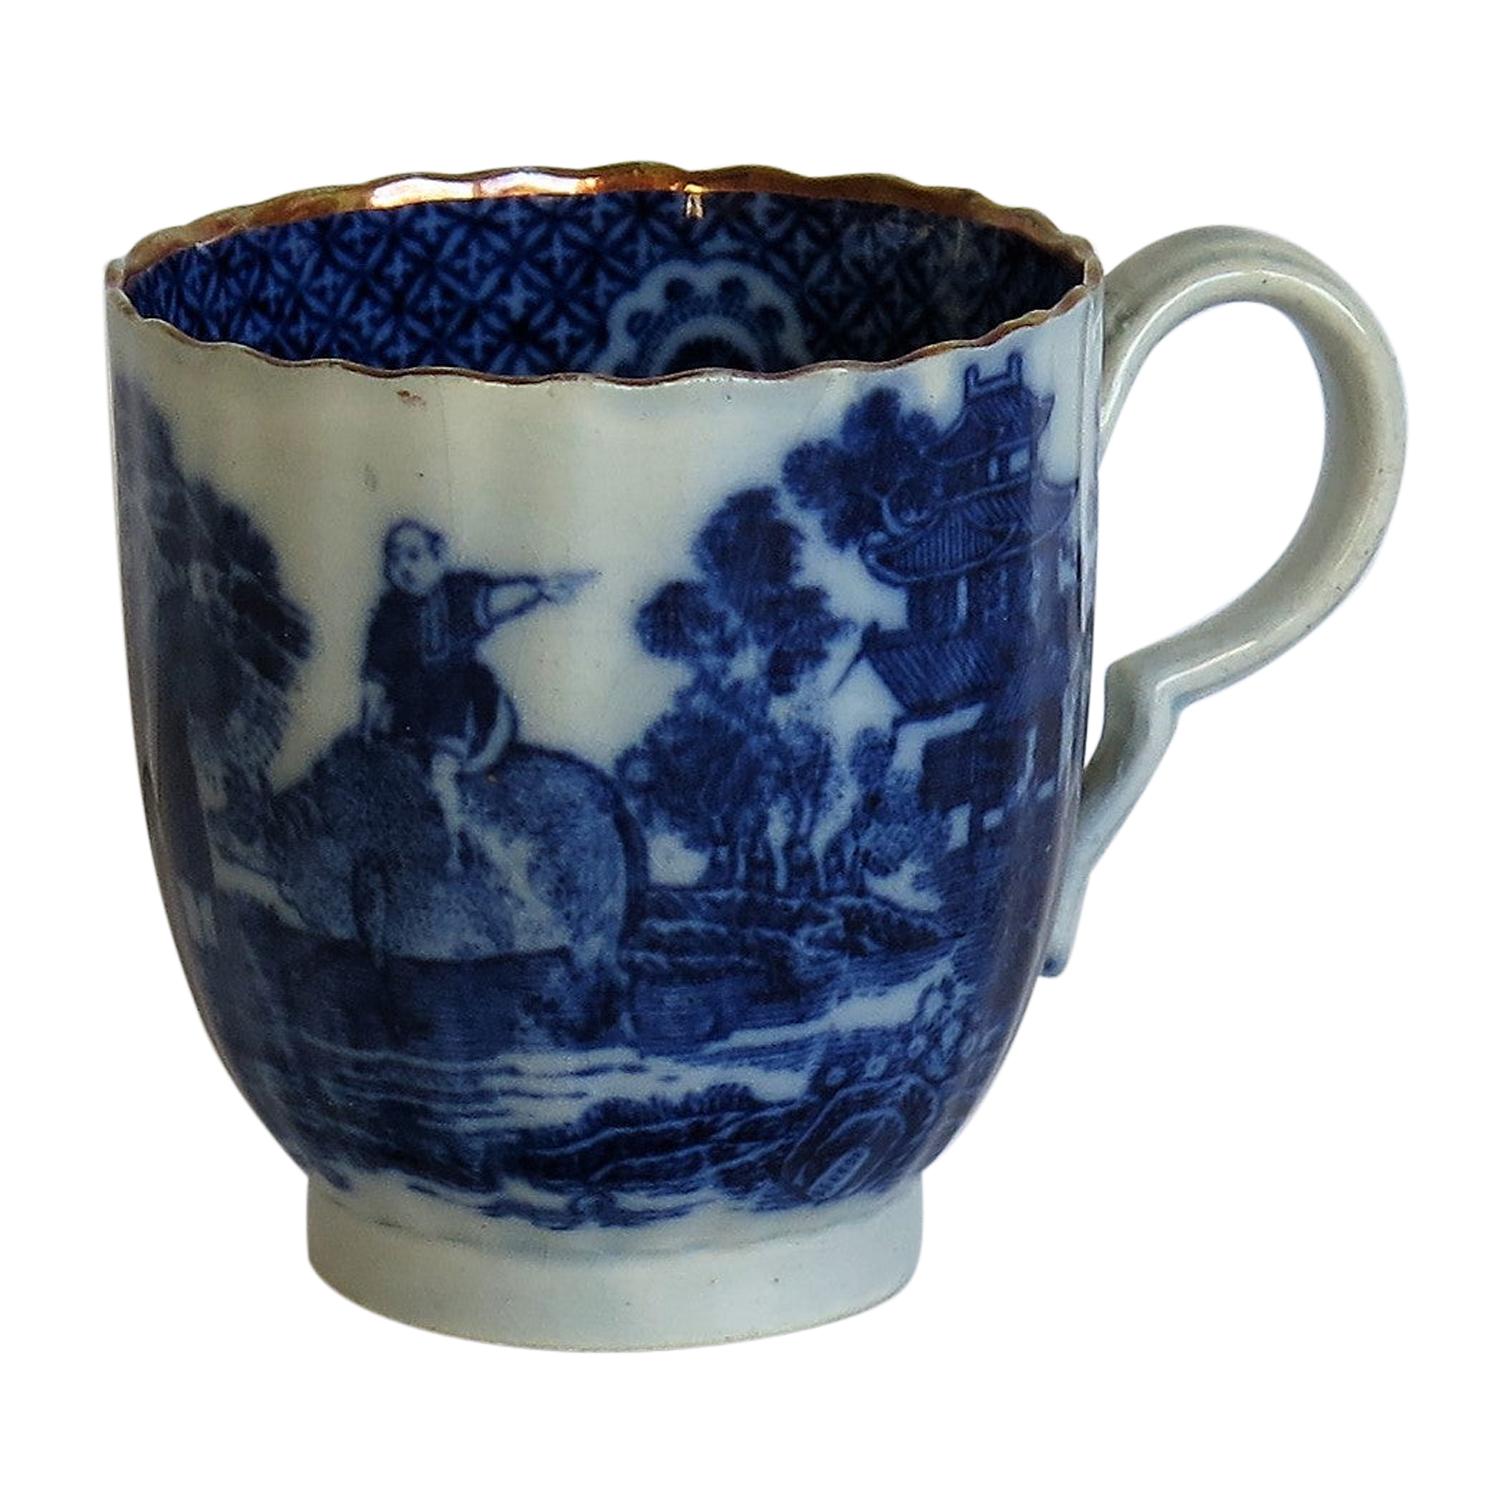 Early Coffee Cup Blue and White Boy on a Buffalo Ptn probably Spode, circa 1790